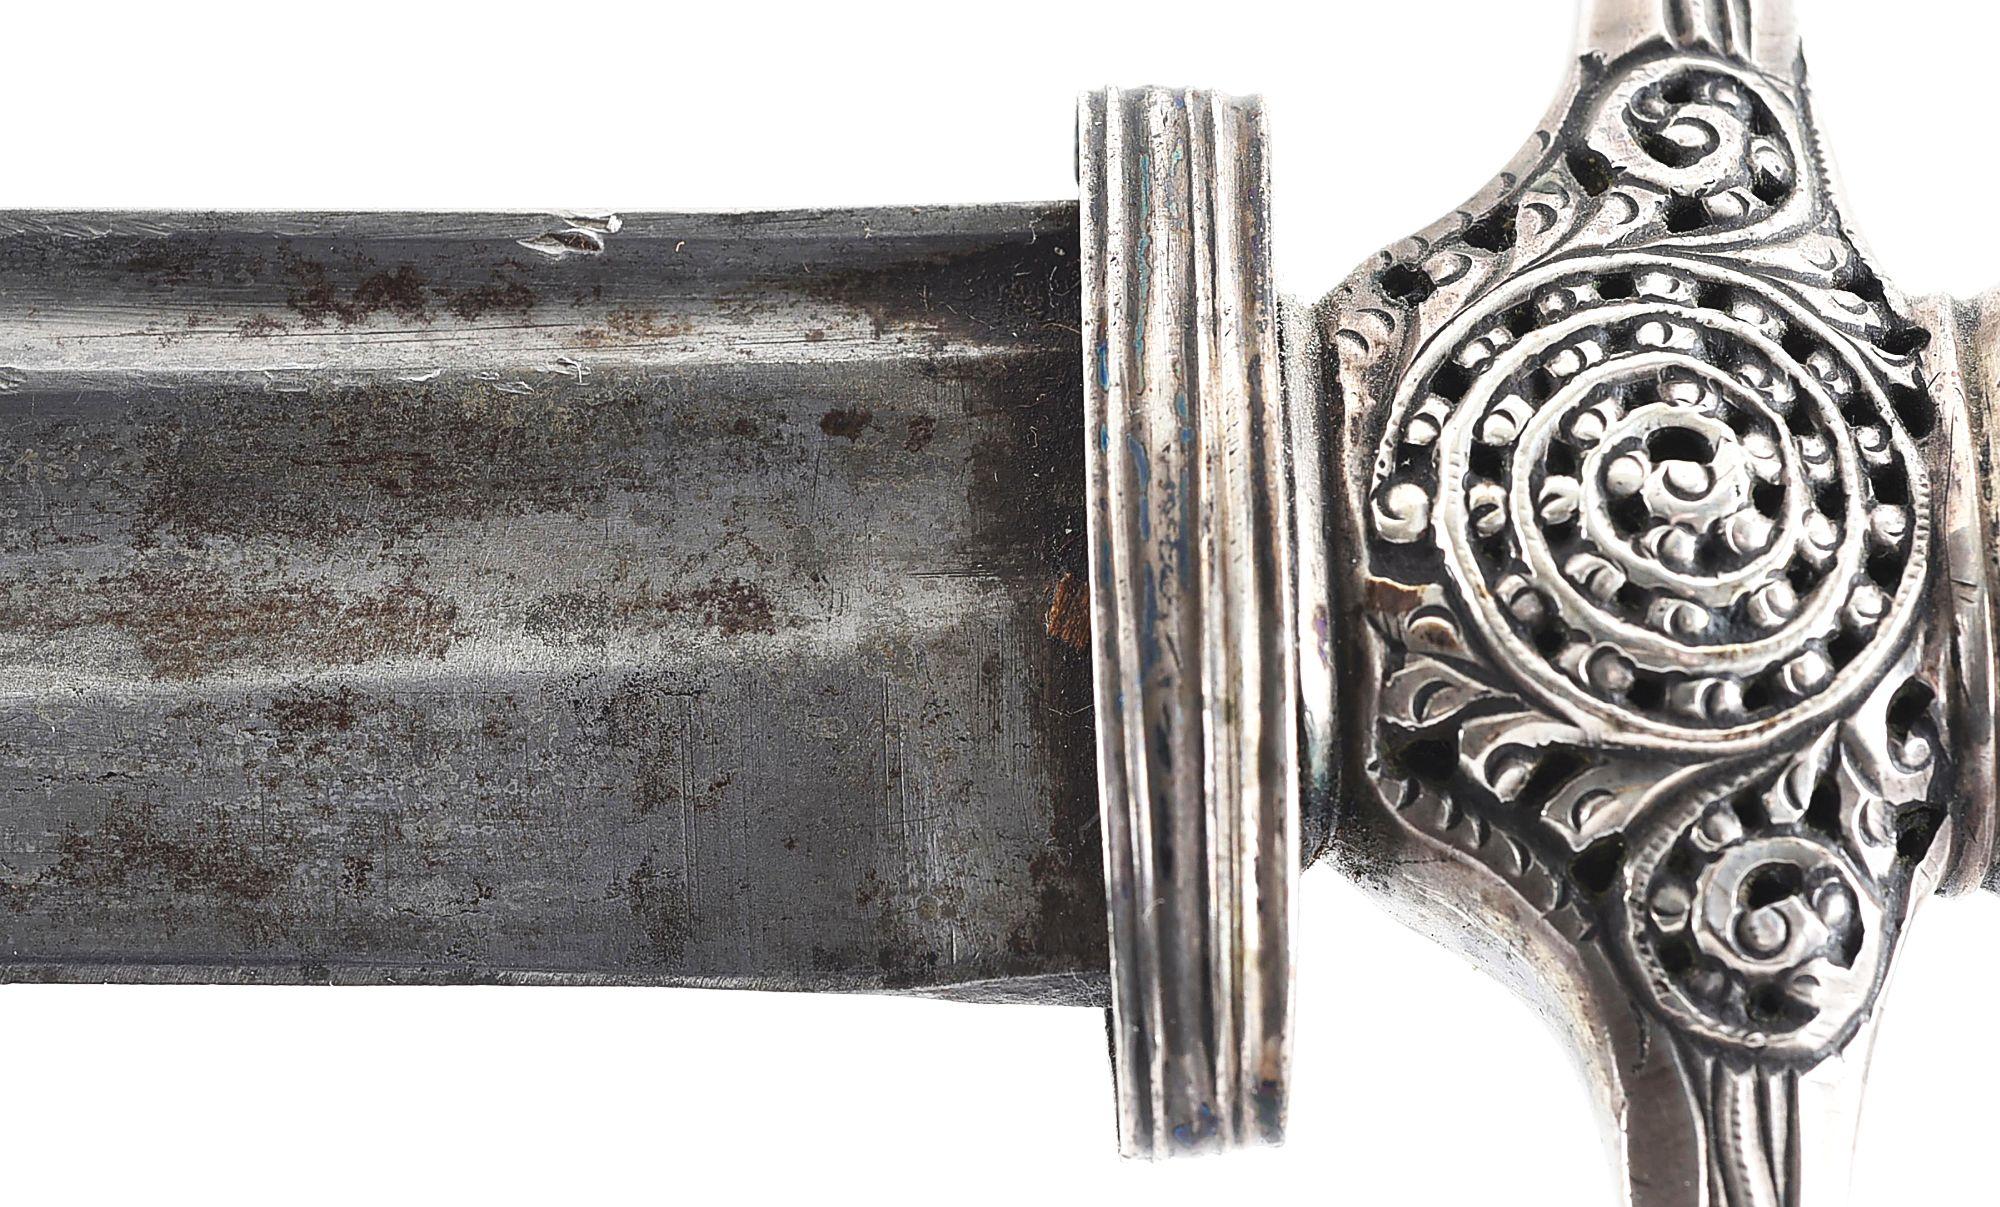 SILVER-HILTED EAGLE HEAD POMMEL SWORD WITH SCABBARD.